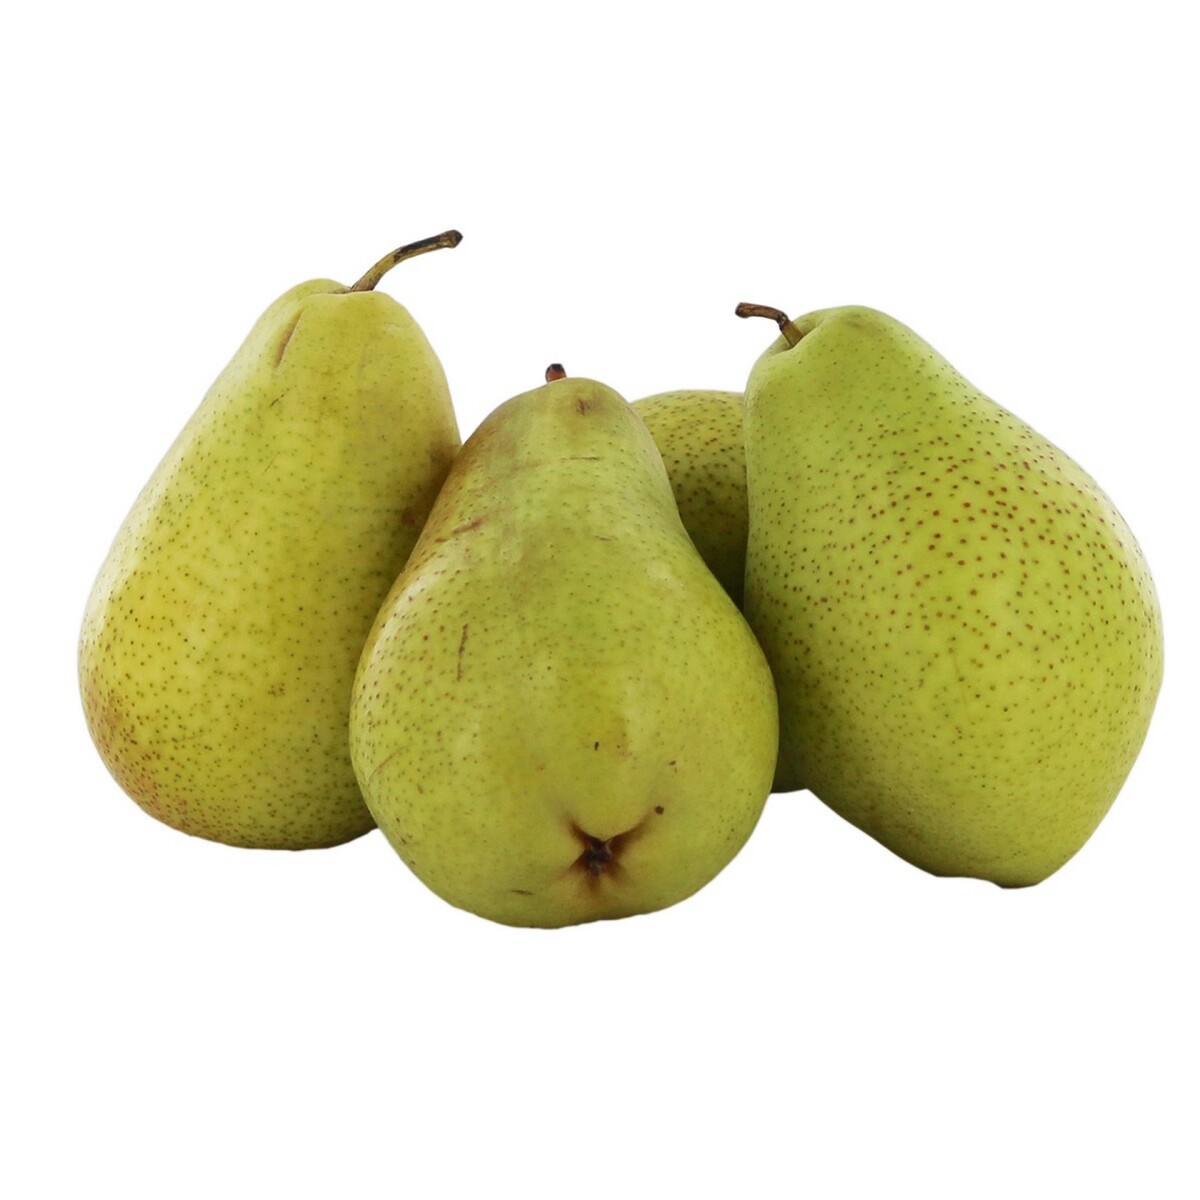 Pears Vermont Beauty Approx. 1kg to 1.1kg